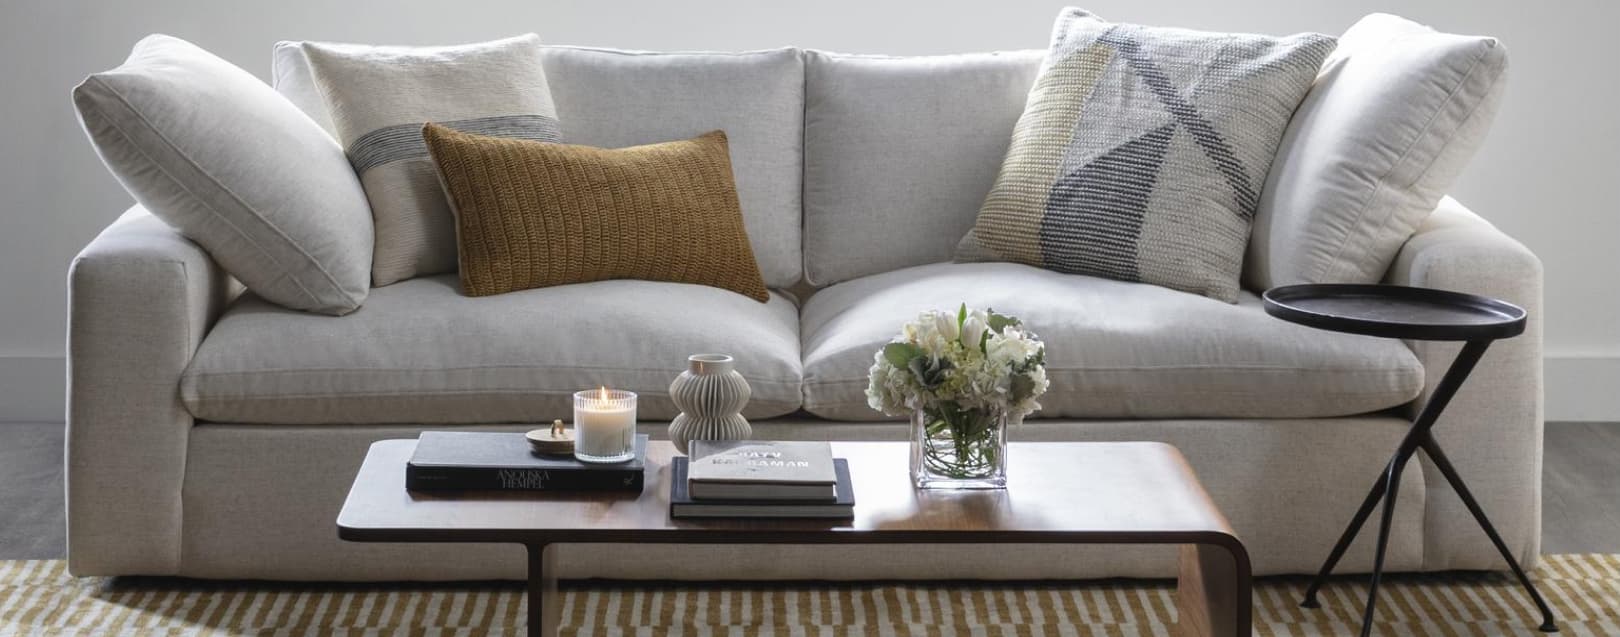 Sofa Cushions Buying Guide: Which Foam Type is Best?